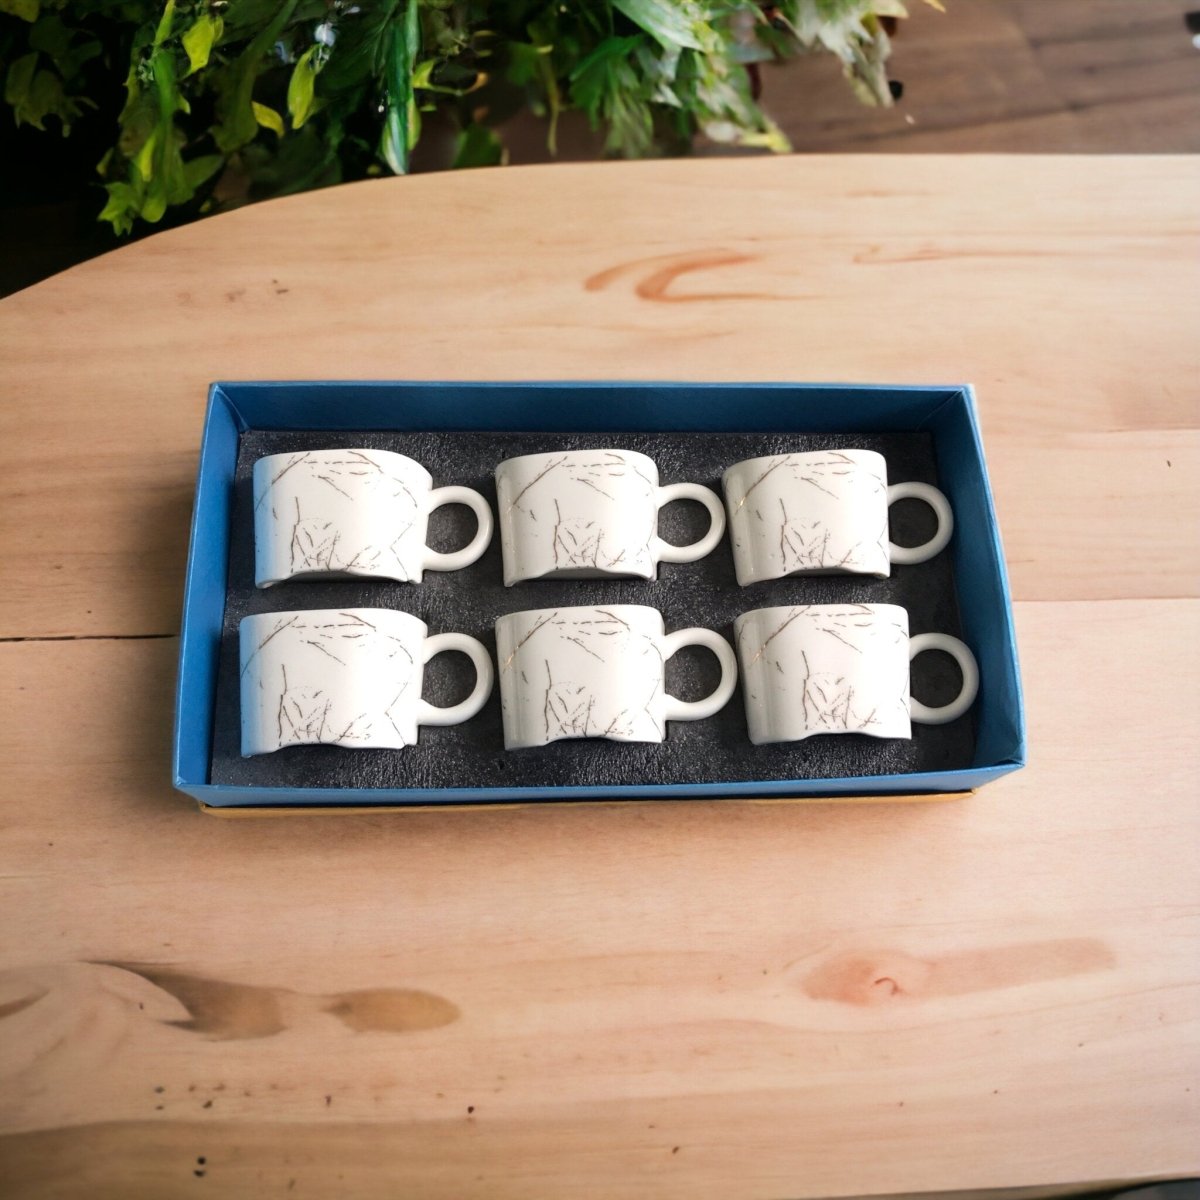 Porcelain Cups White and Gold Marble Finish - Elegant Square Shaped 6 Pcs Cup Set Serves as Tea Cups, Coffee Cups - Kezevel